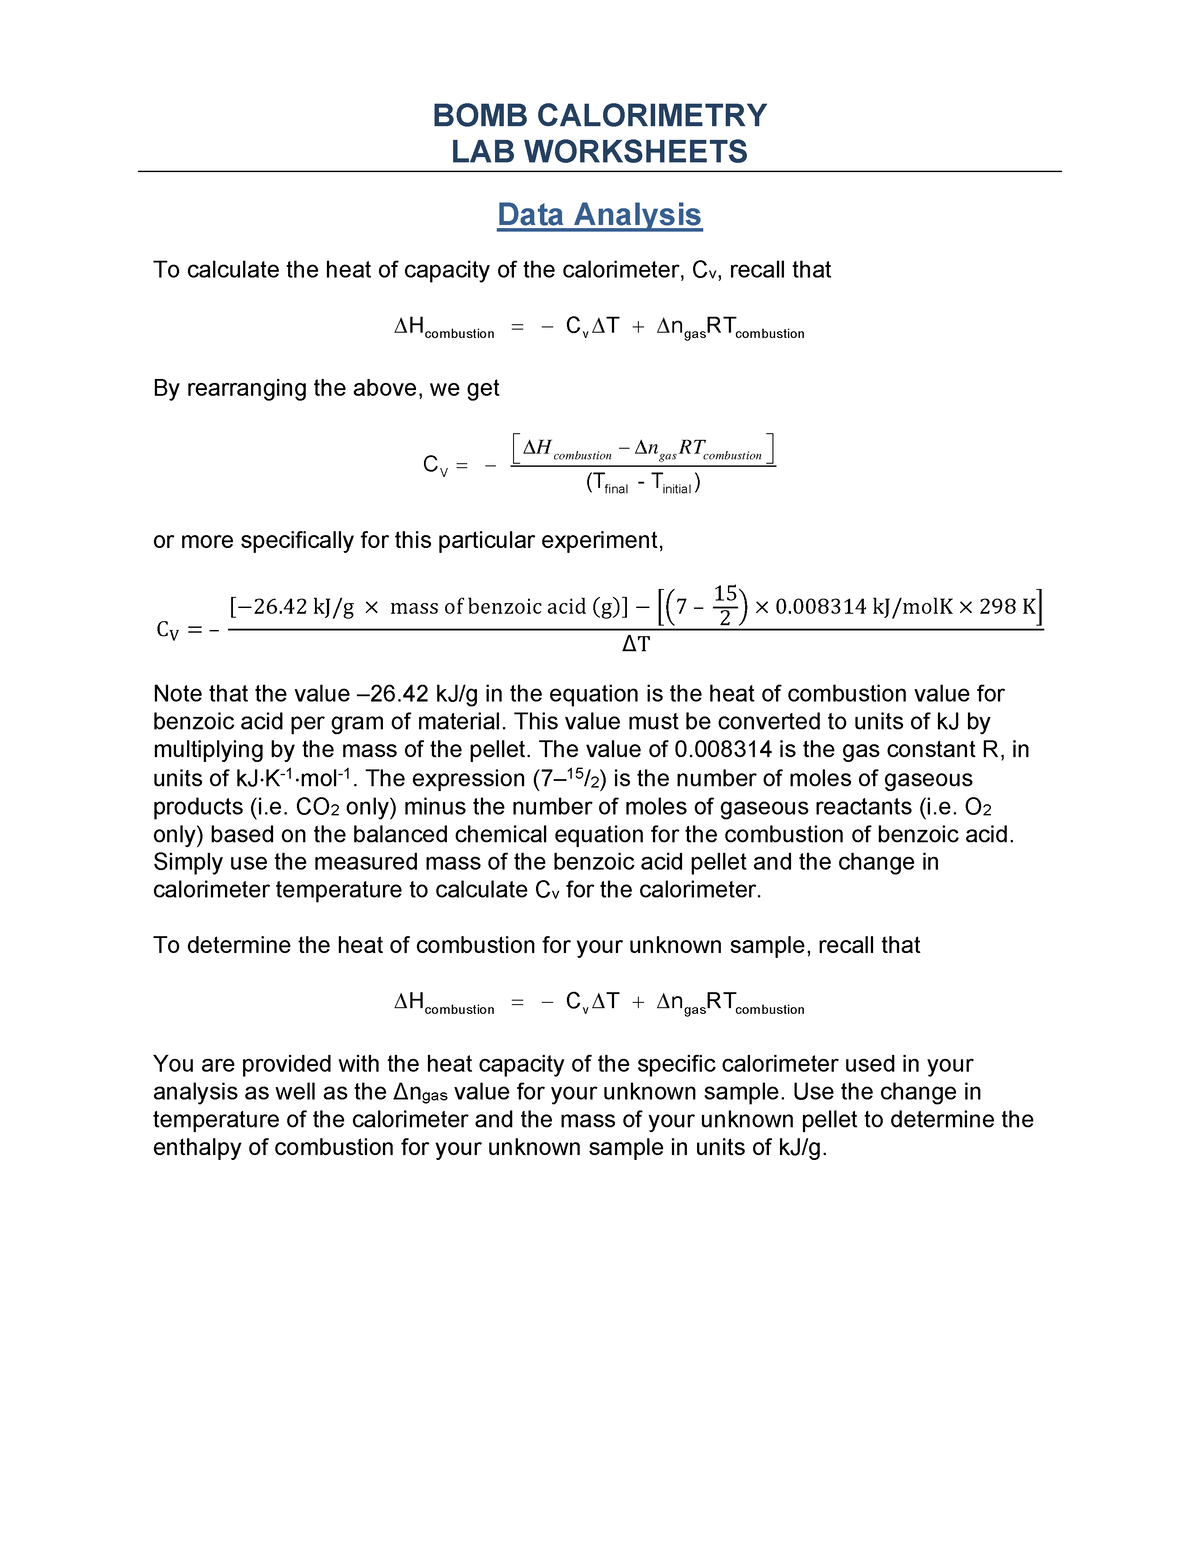 f22-chem1050-dry-lab-a-data-sheets-lab-worksheets-data-analysis-to